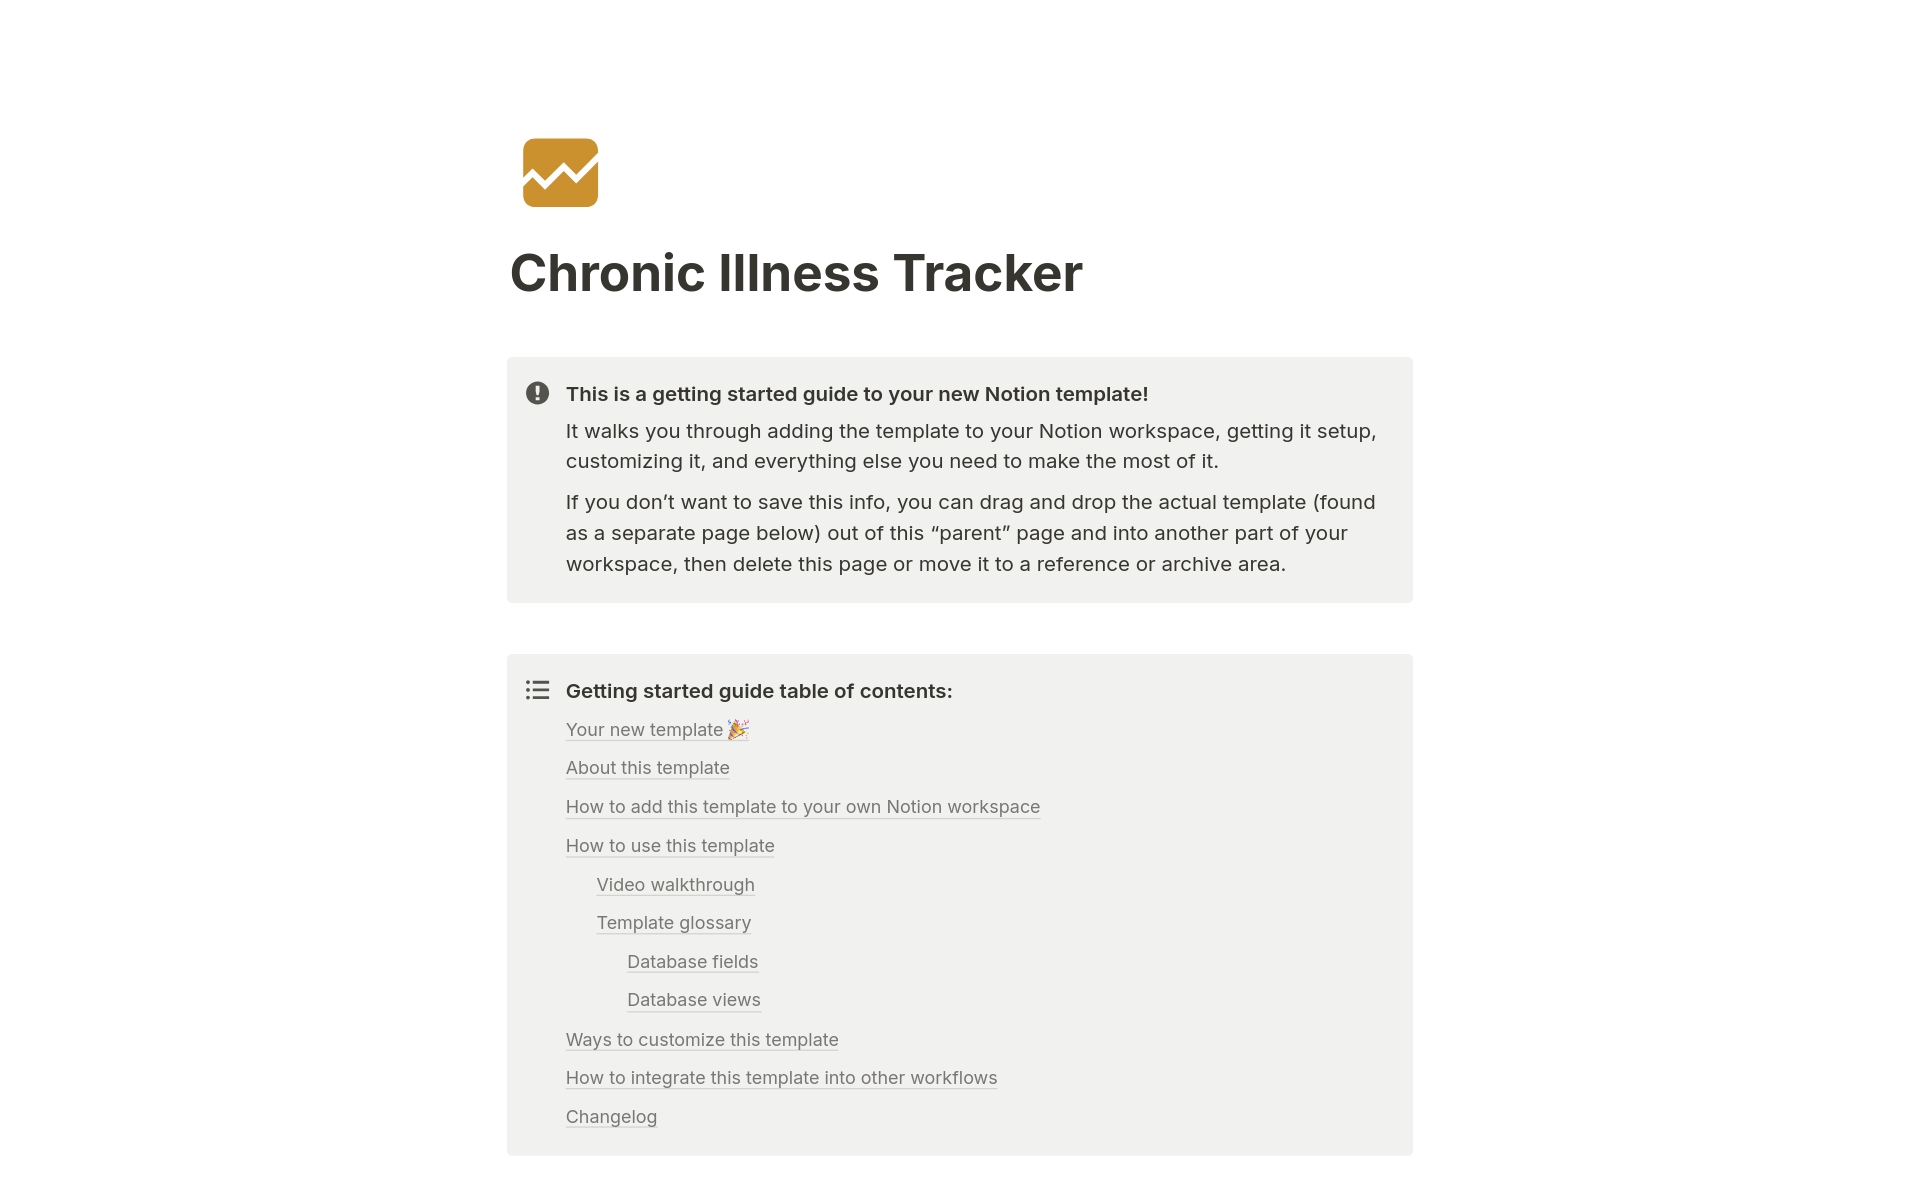 Understand your limits, learn your triggers, and manage your self-care with this template to help you manage your chronic illness to reduce flare-ups and burnouts by tracking symptoms and other health data.